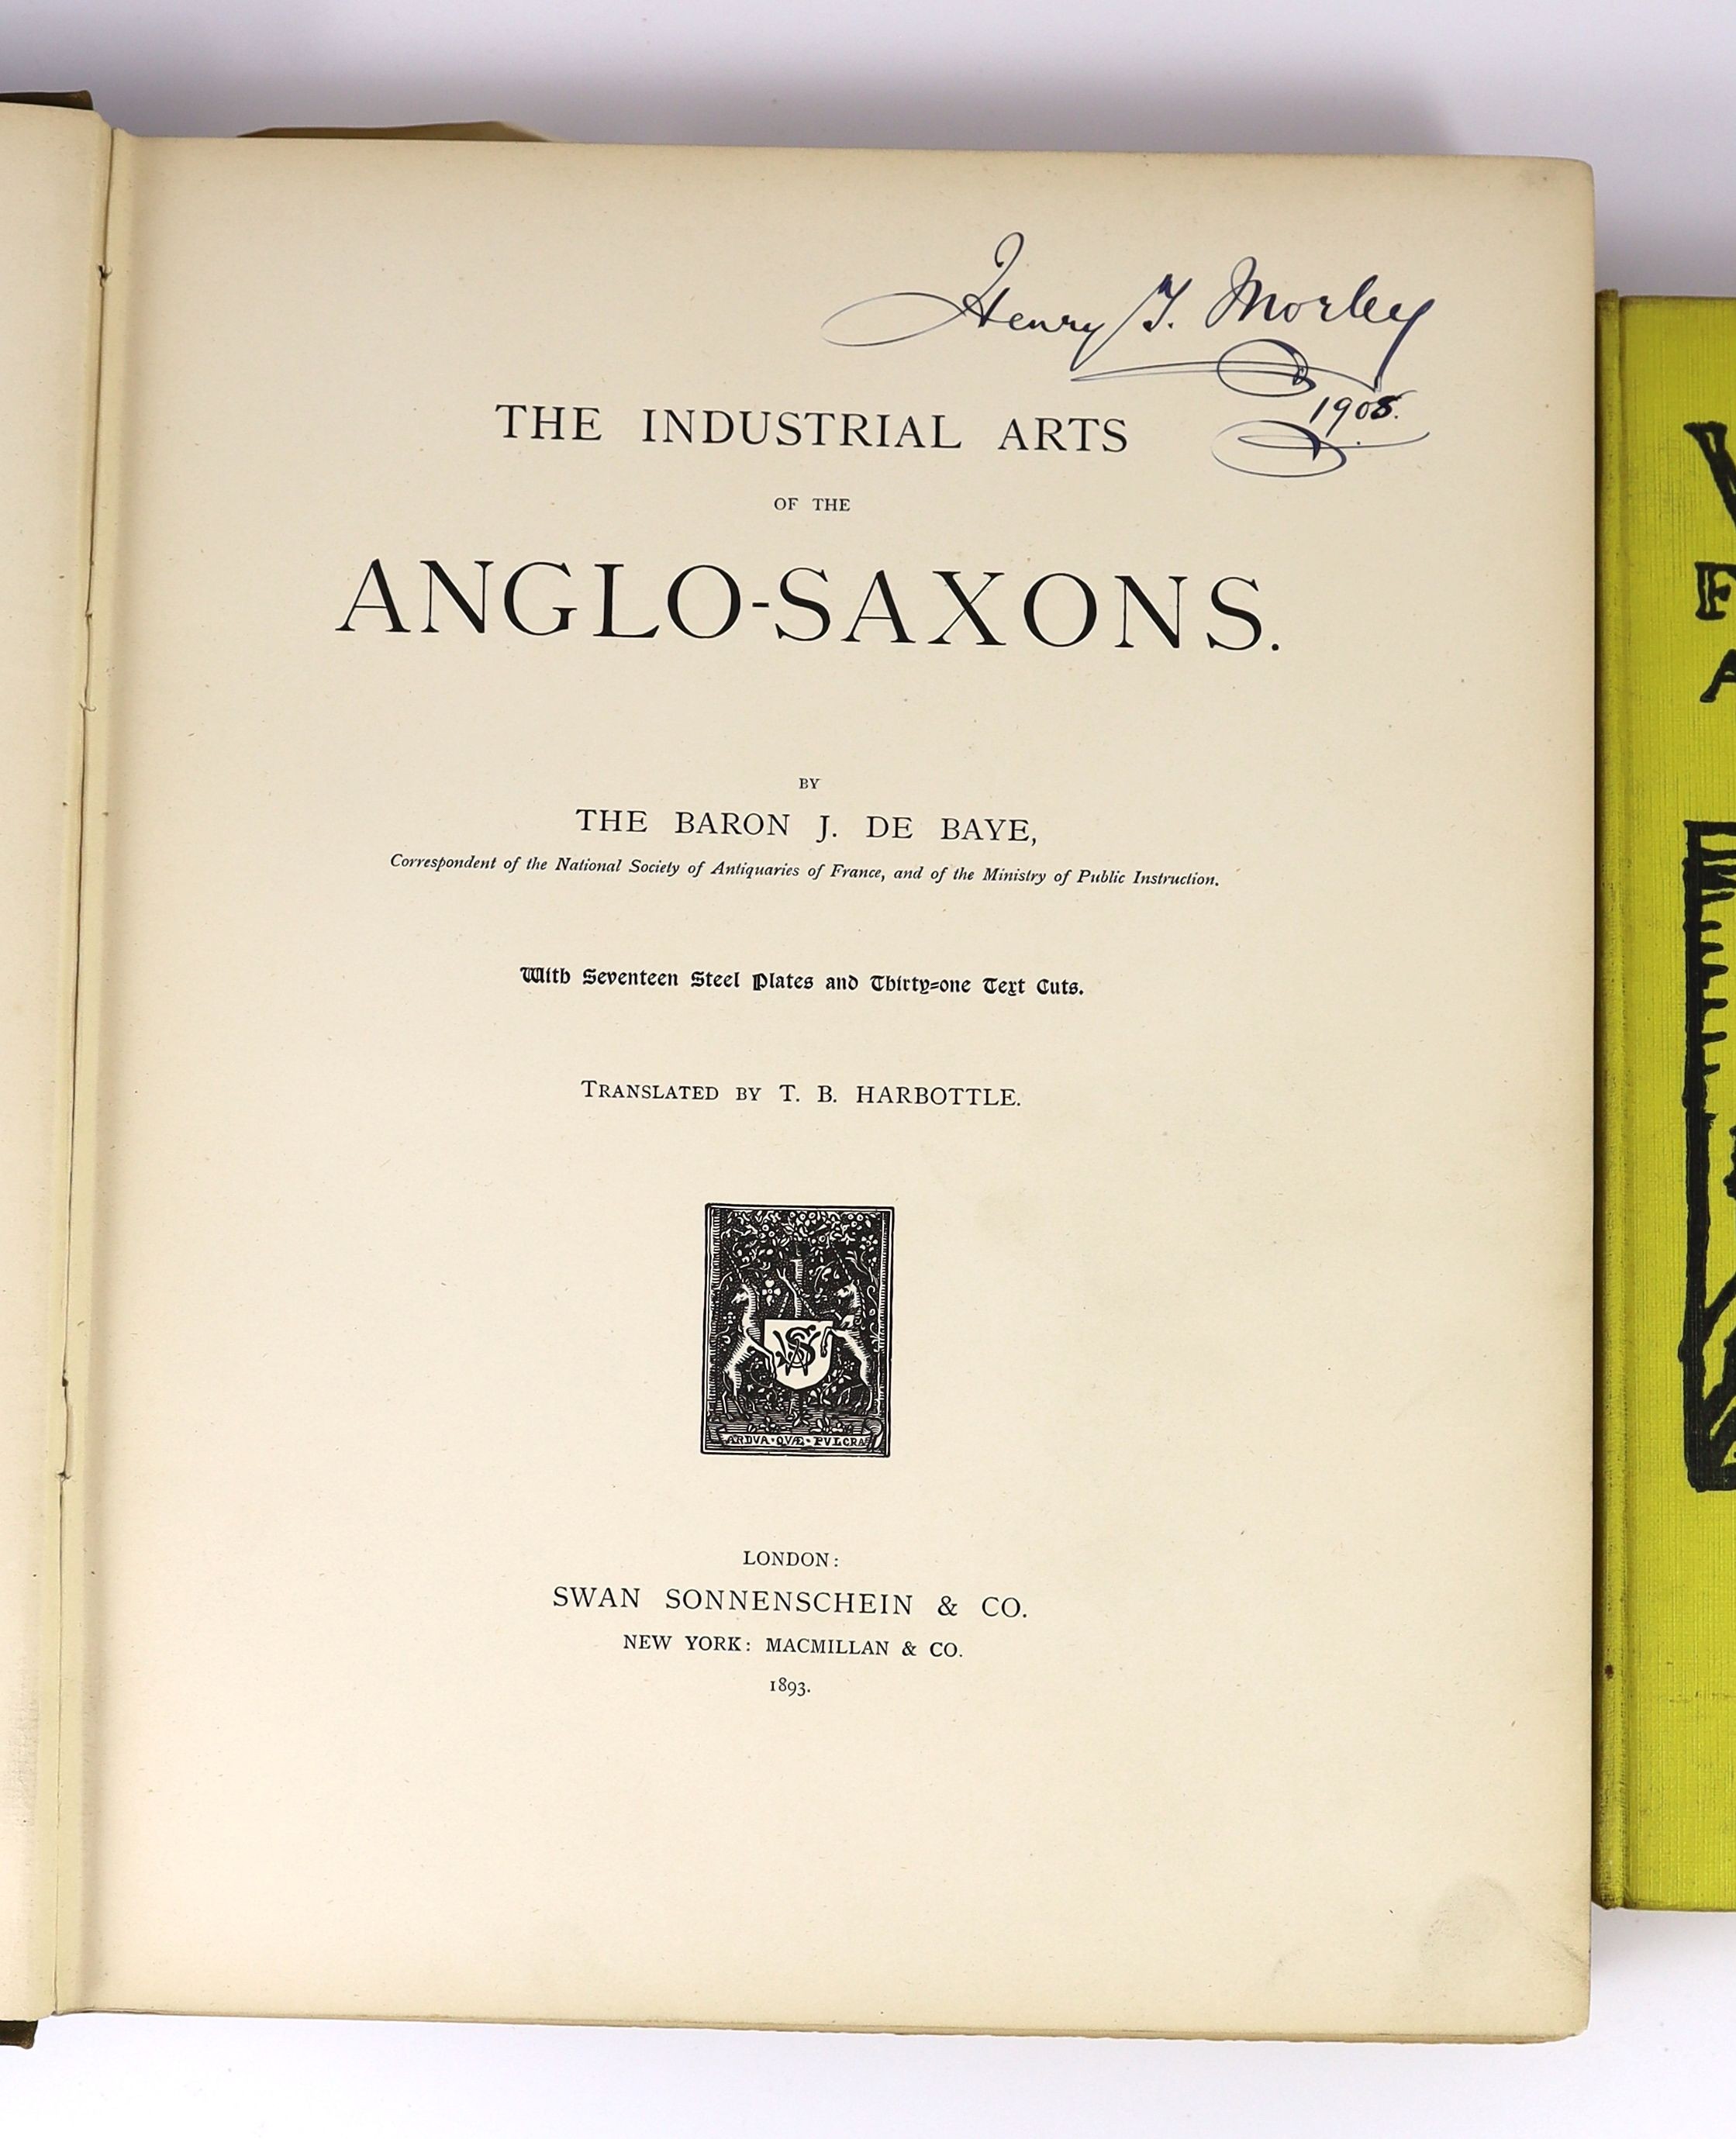 Brangwyn, Frank and Preston, Hayter - Windmills, 4to, yellow cloth, John Lane The Bodley Head, London, 1923 and Baye, Baron J. de - The Industrial Arts of the Anglo-Saxons, 4to, cloth gilt, Swan Sonnenschein, London, 189